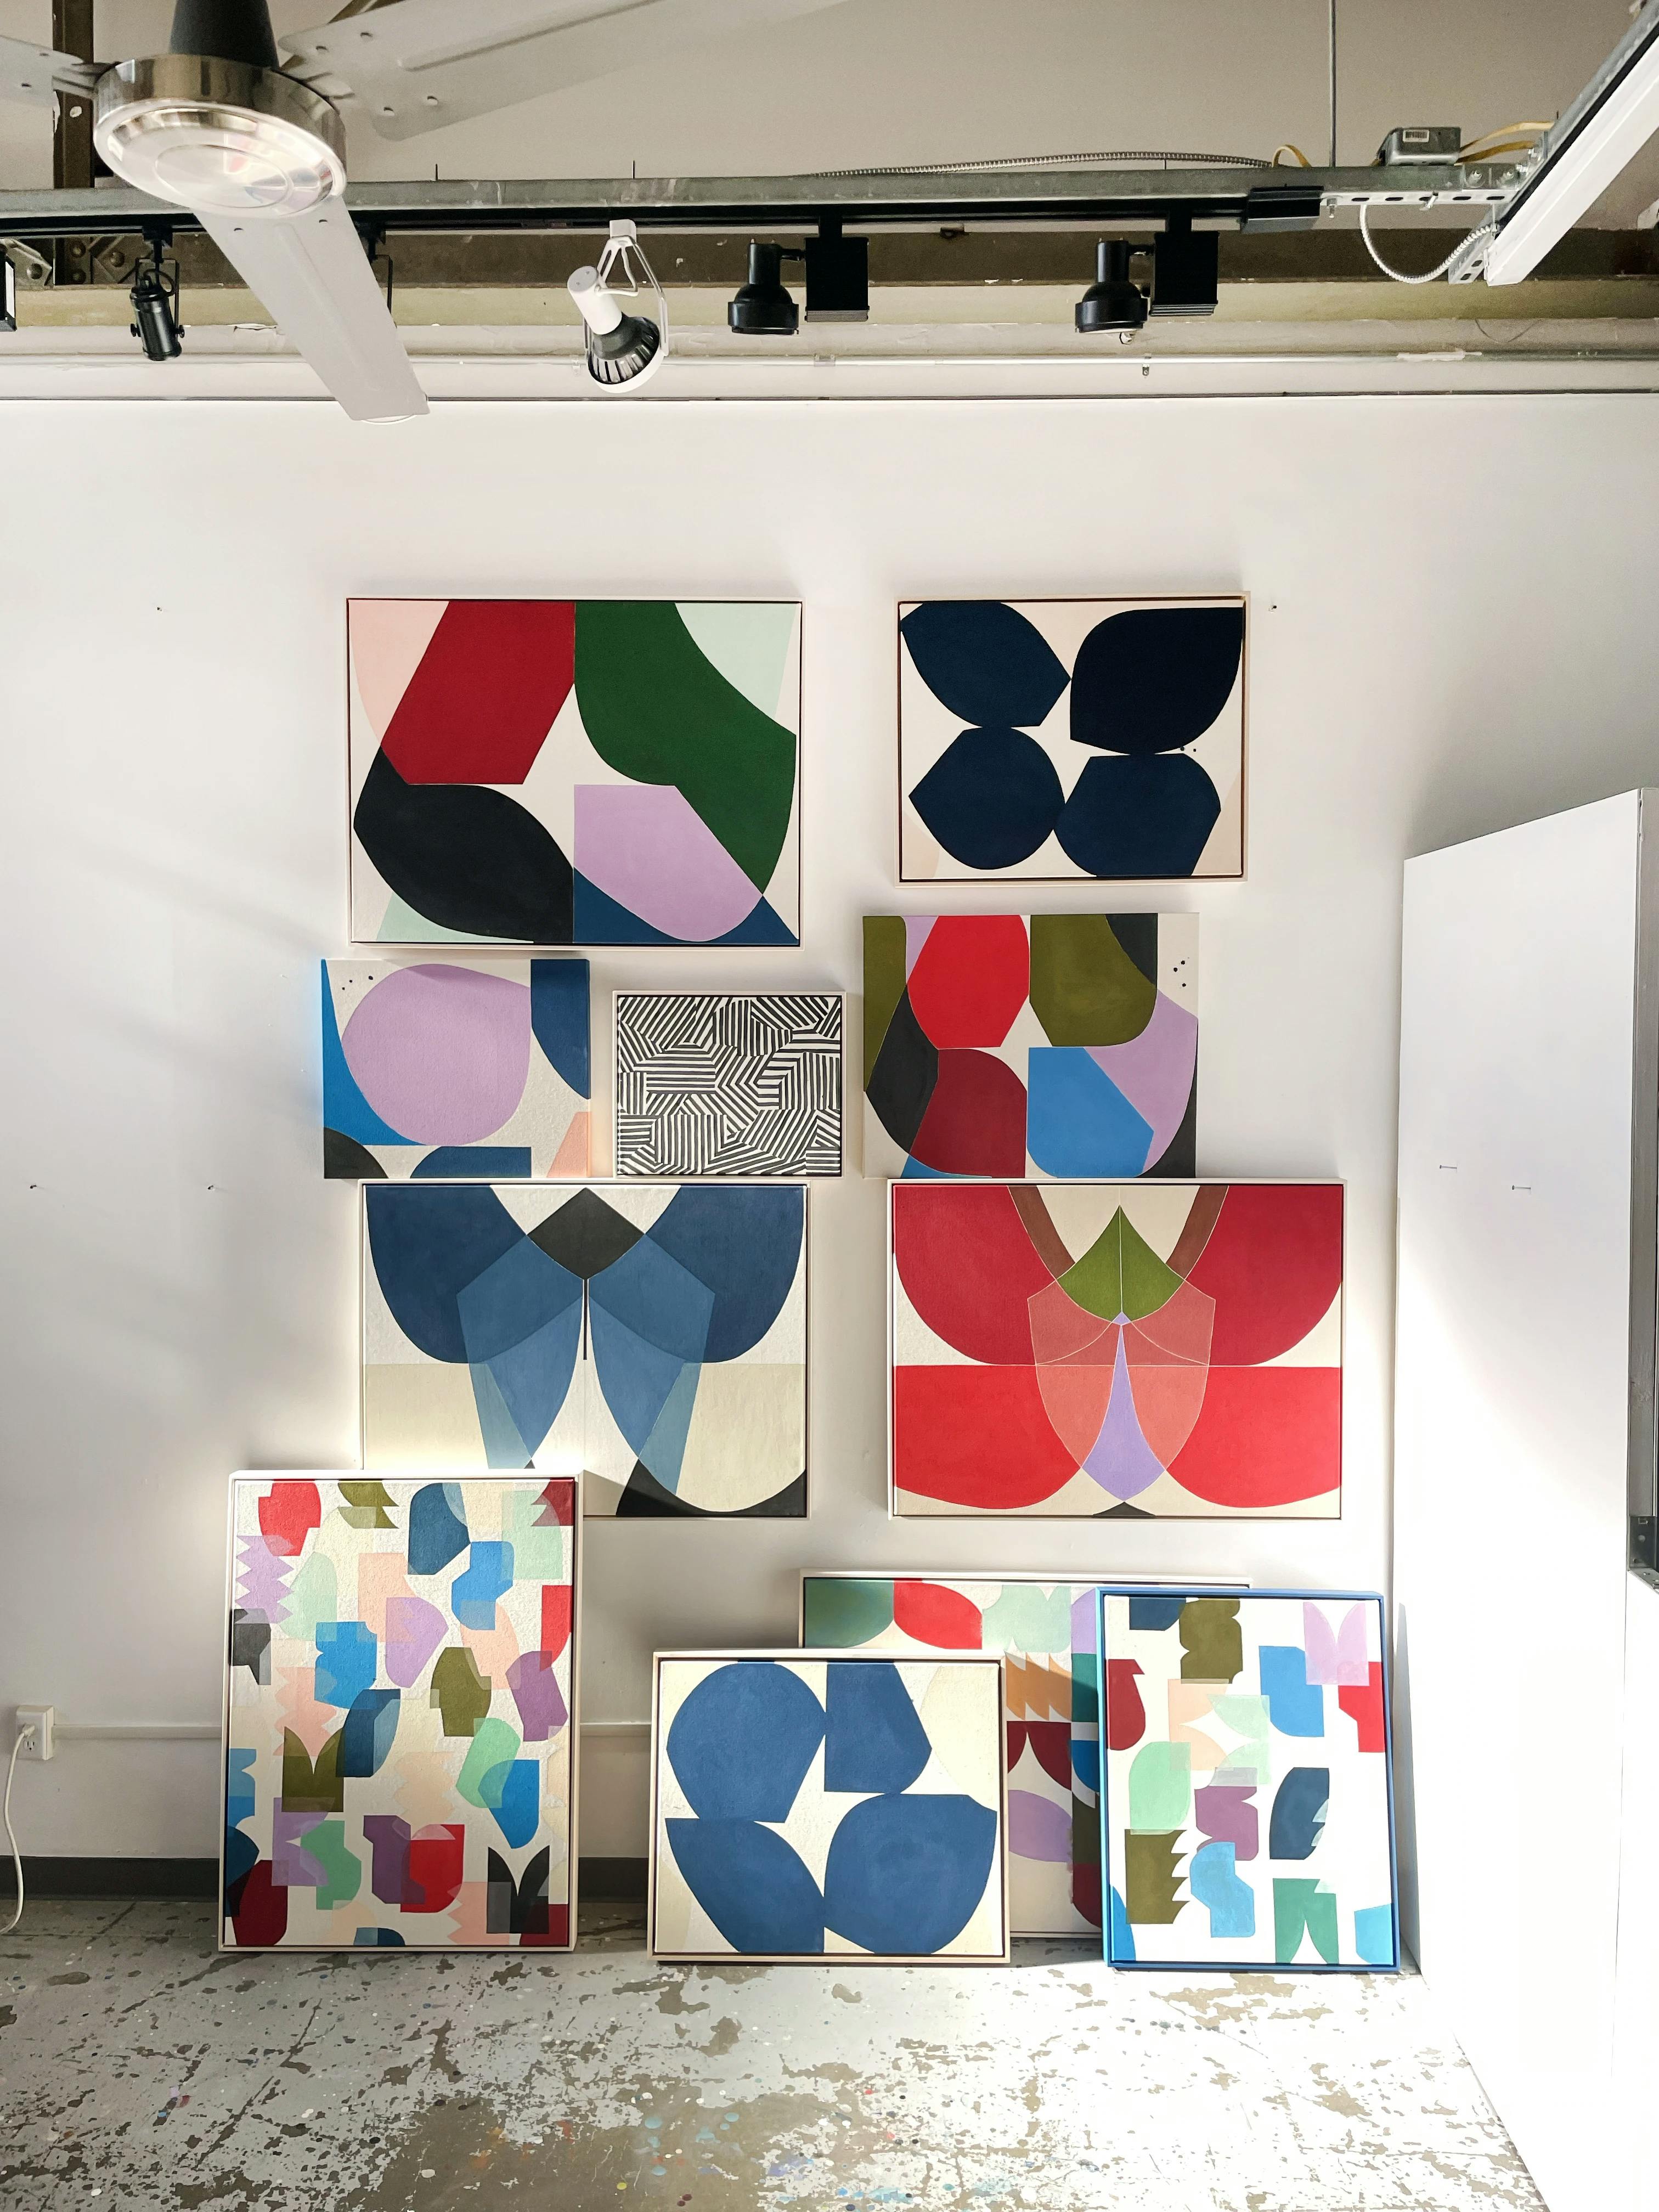 A collection of large, multicolored abstract paintings by artist Christina Flowers in her studio.